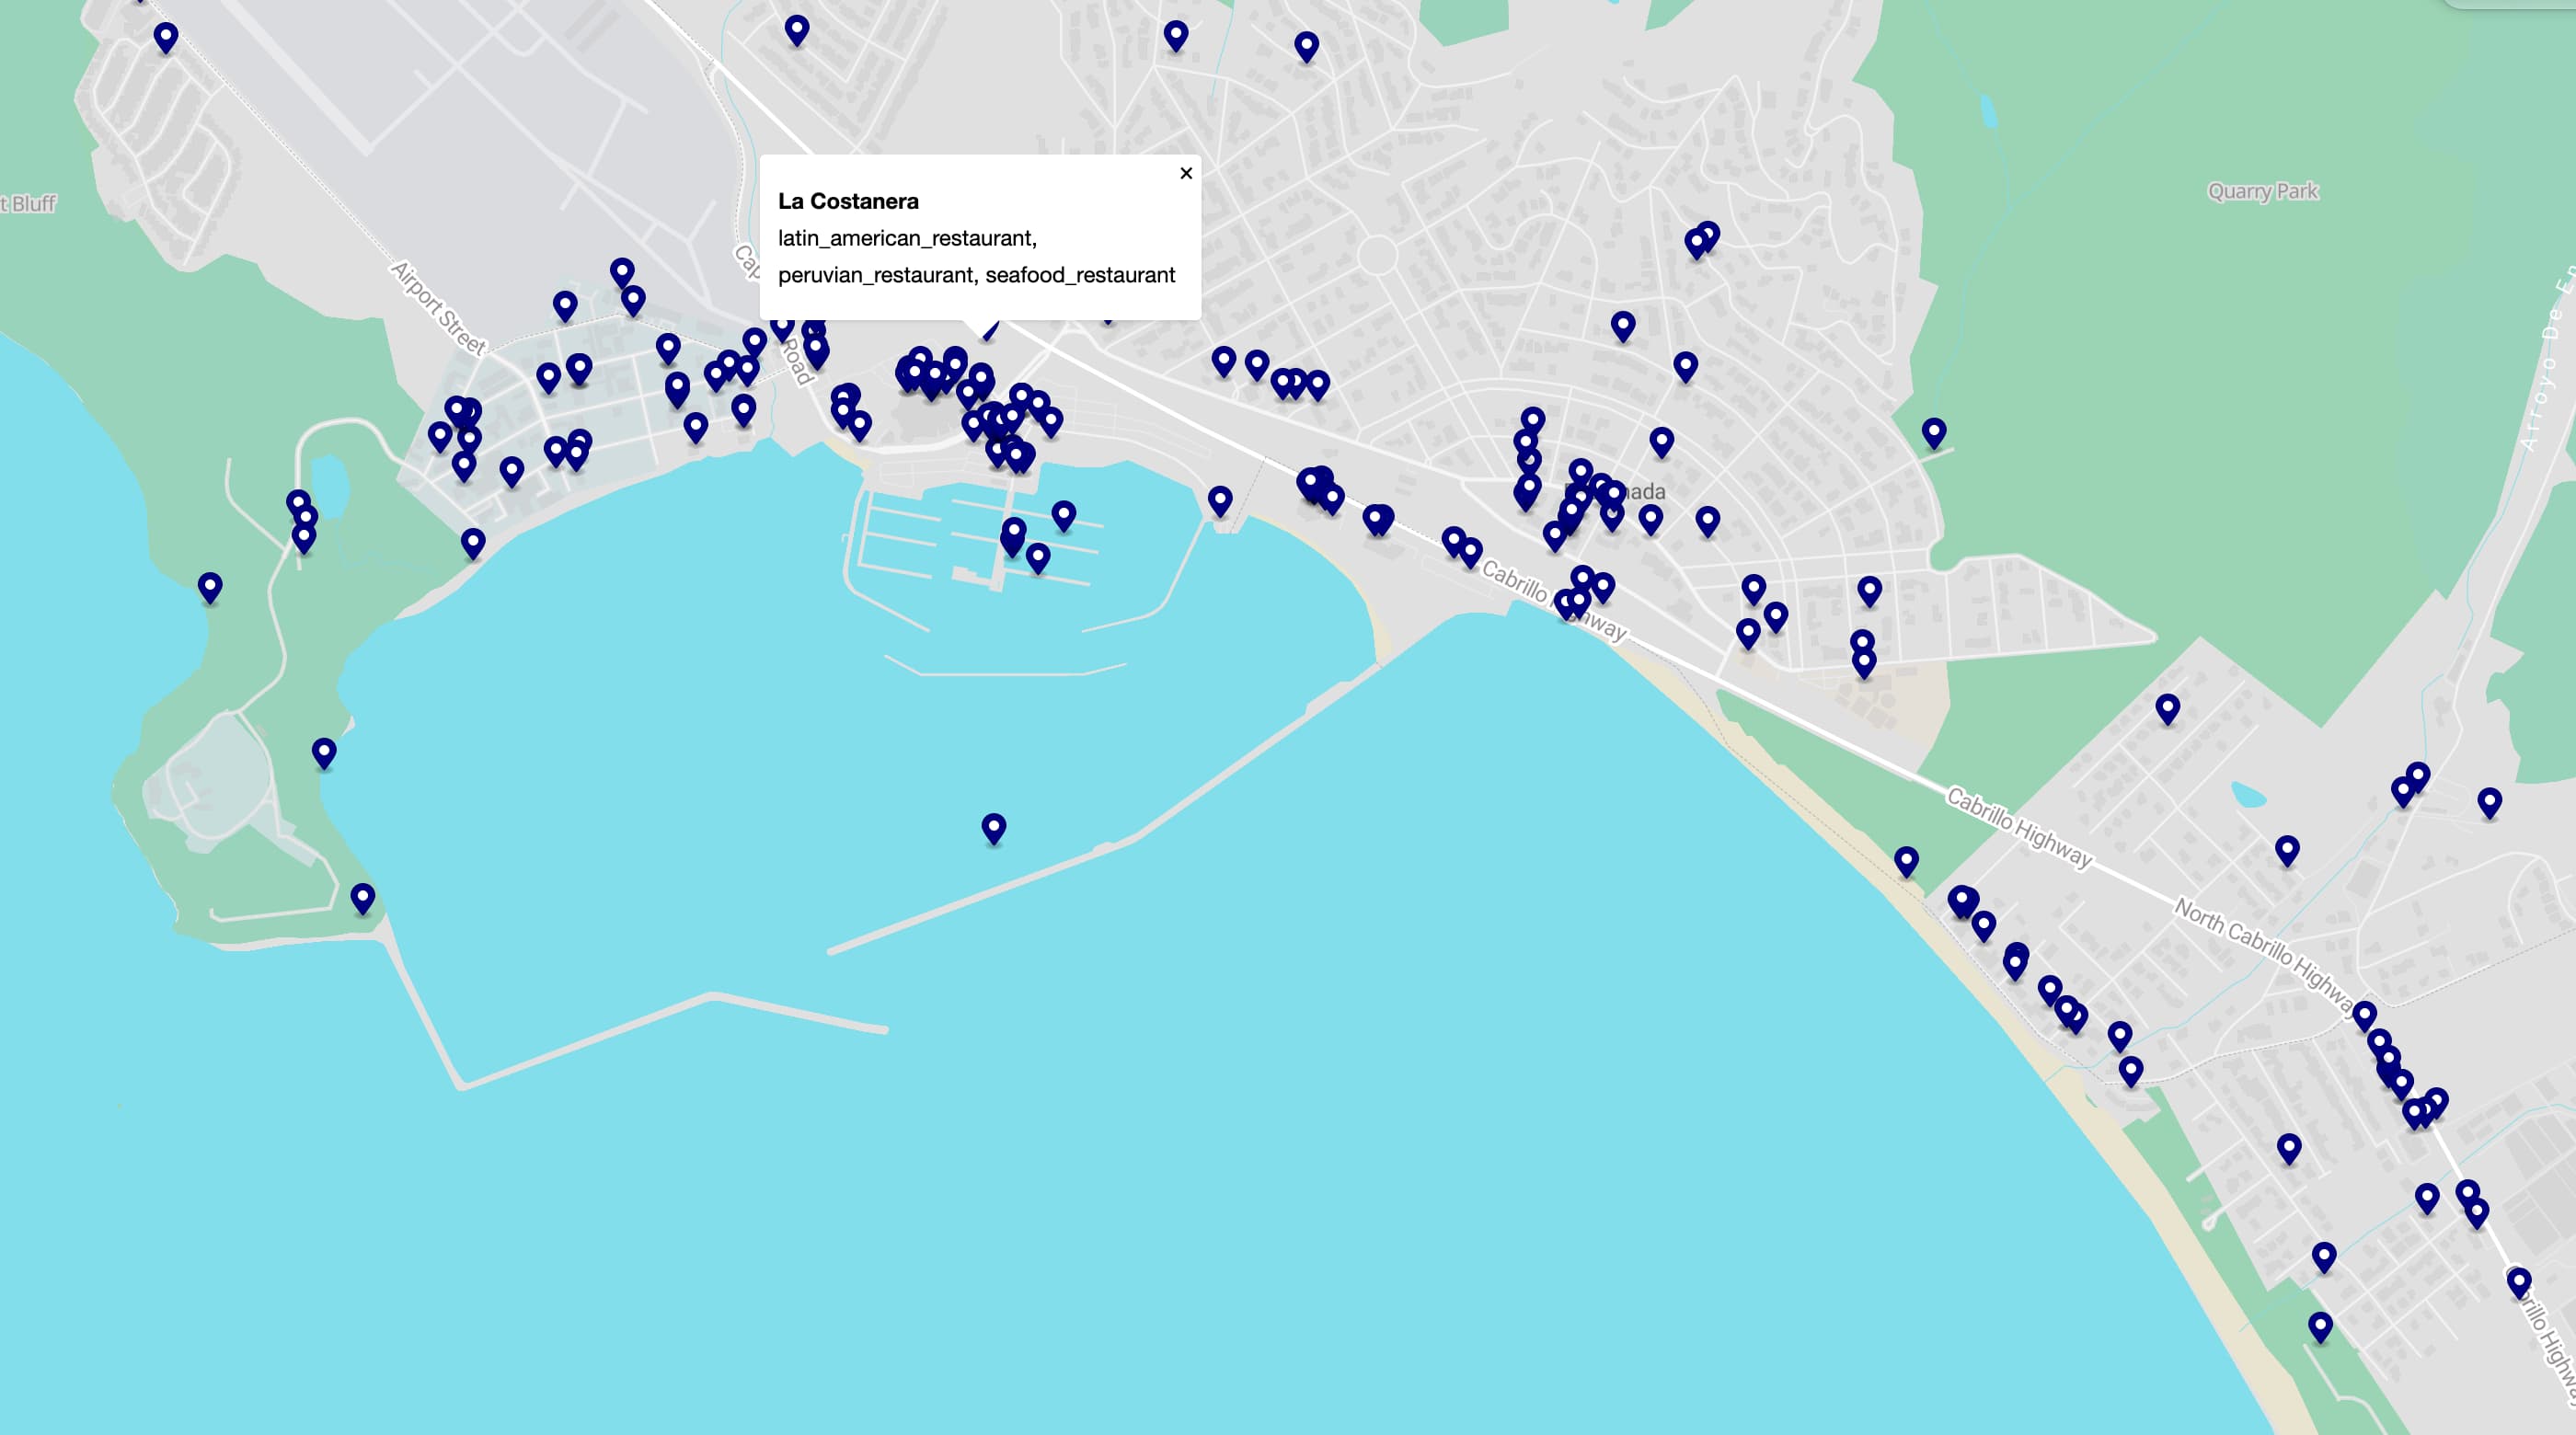 The map is now scattered with dark blue markers. One of them has a popup open, reading La Costanera: latin_american_restaurant, peruvian_restaurant, seafood_restaurant